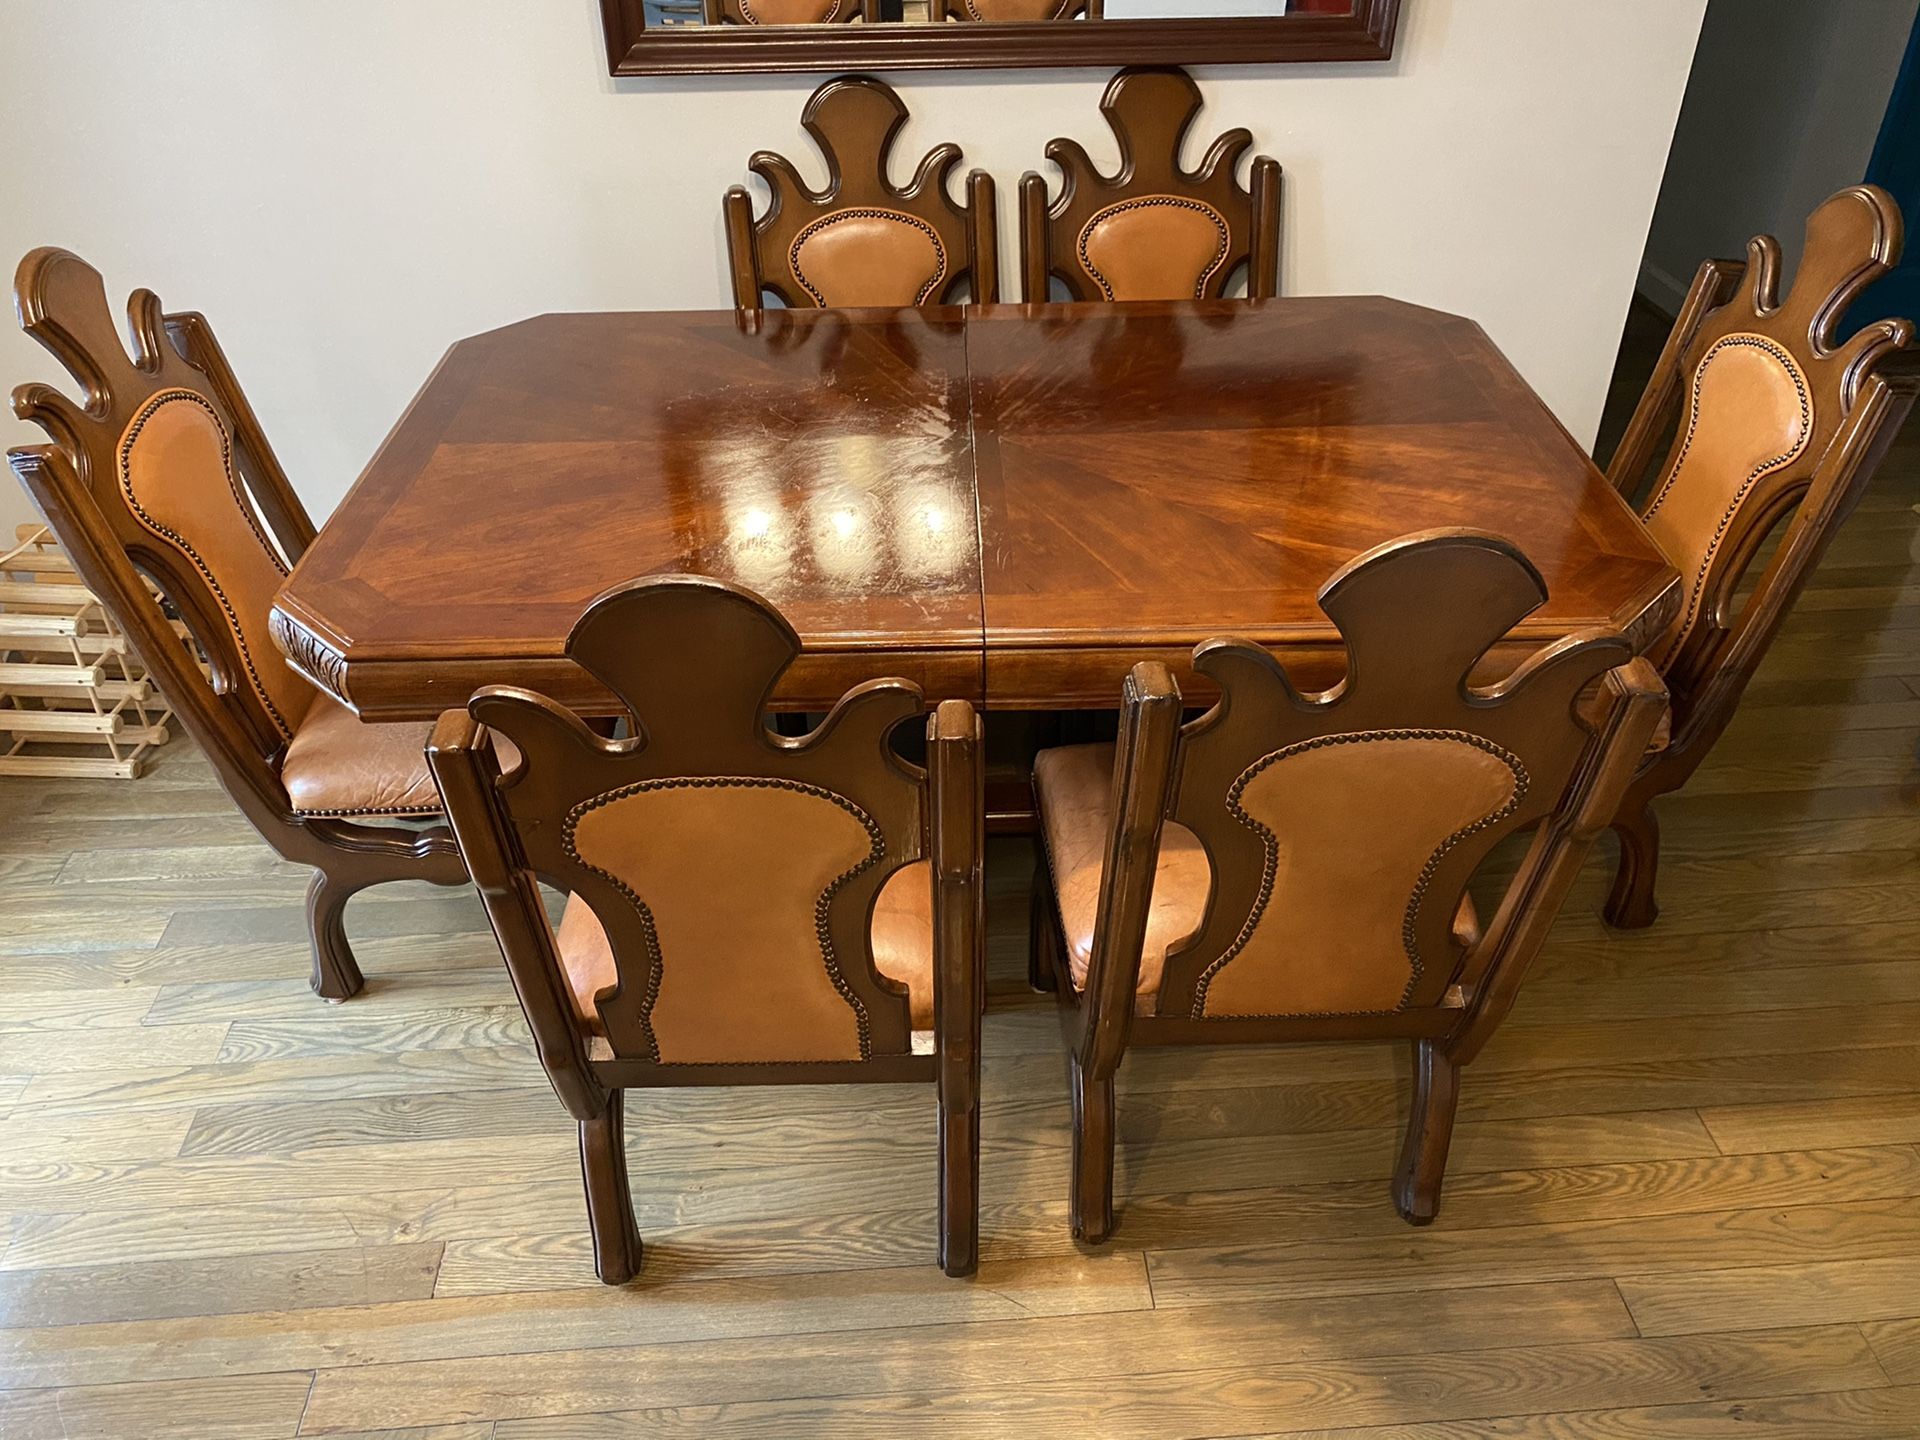 Dinning table and antique chairs